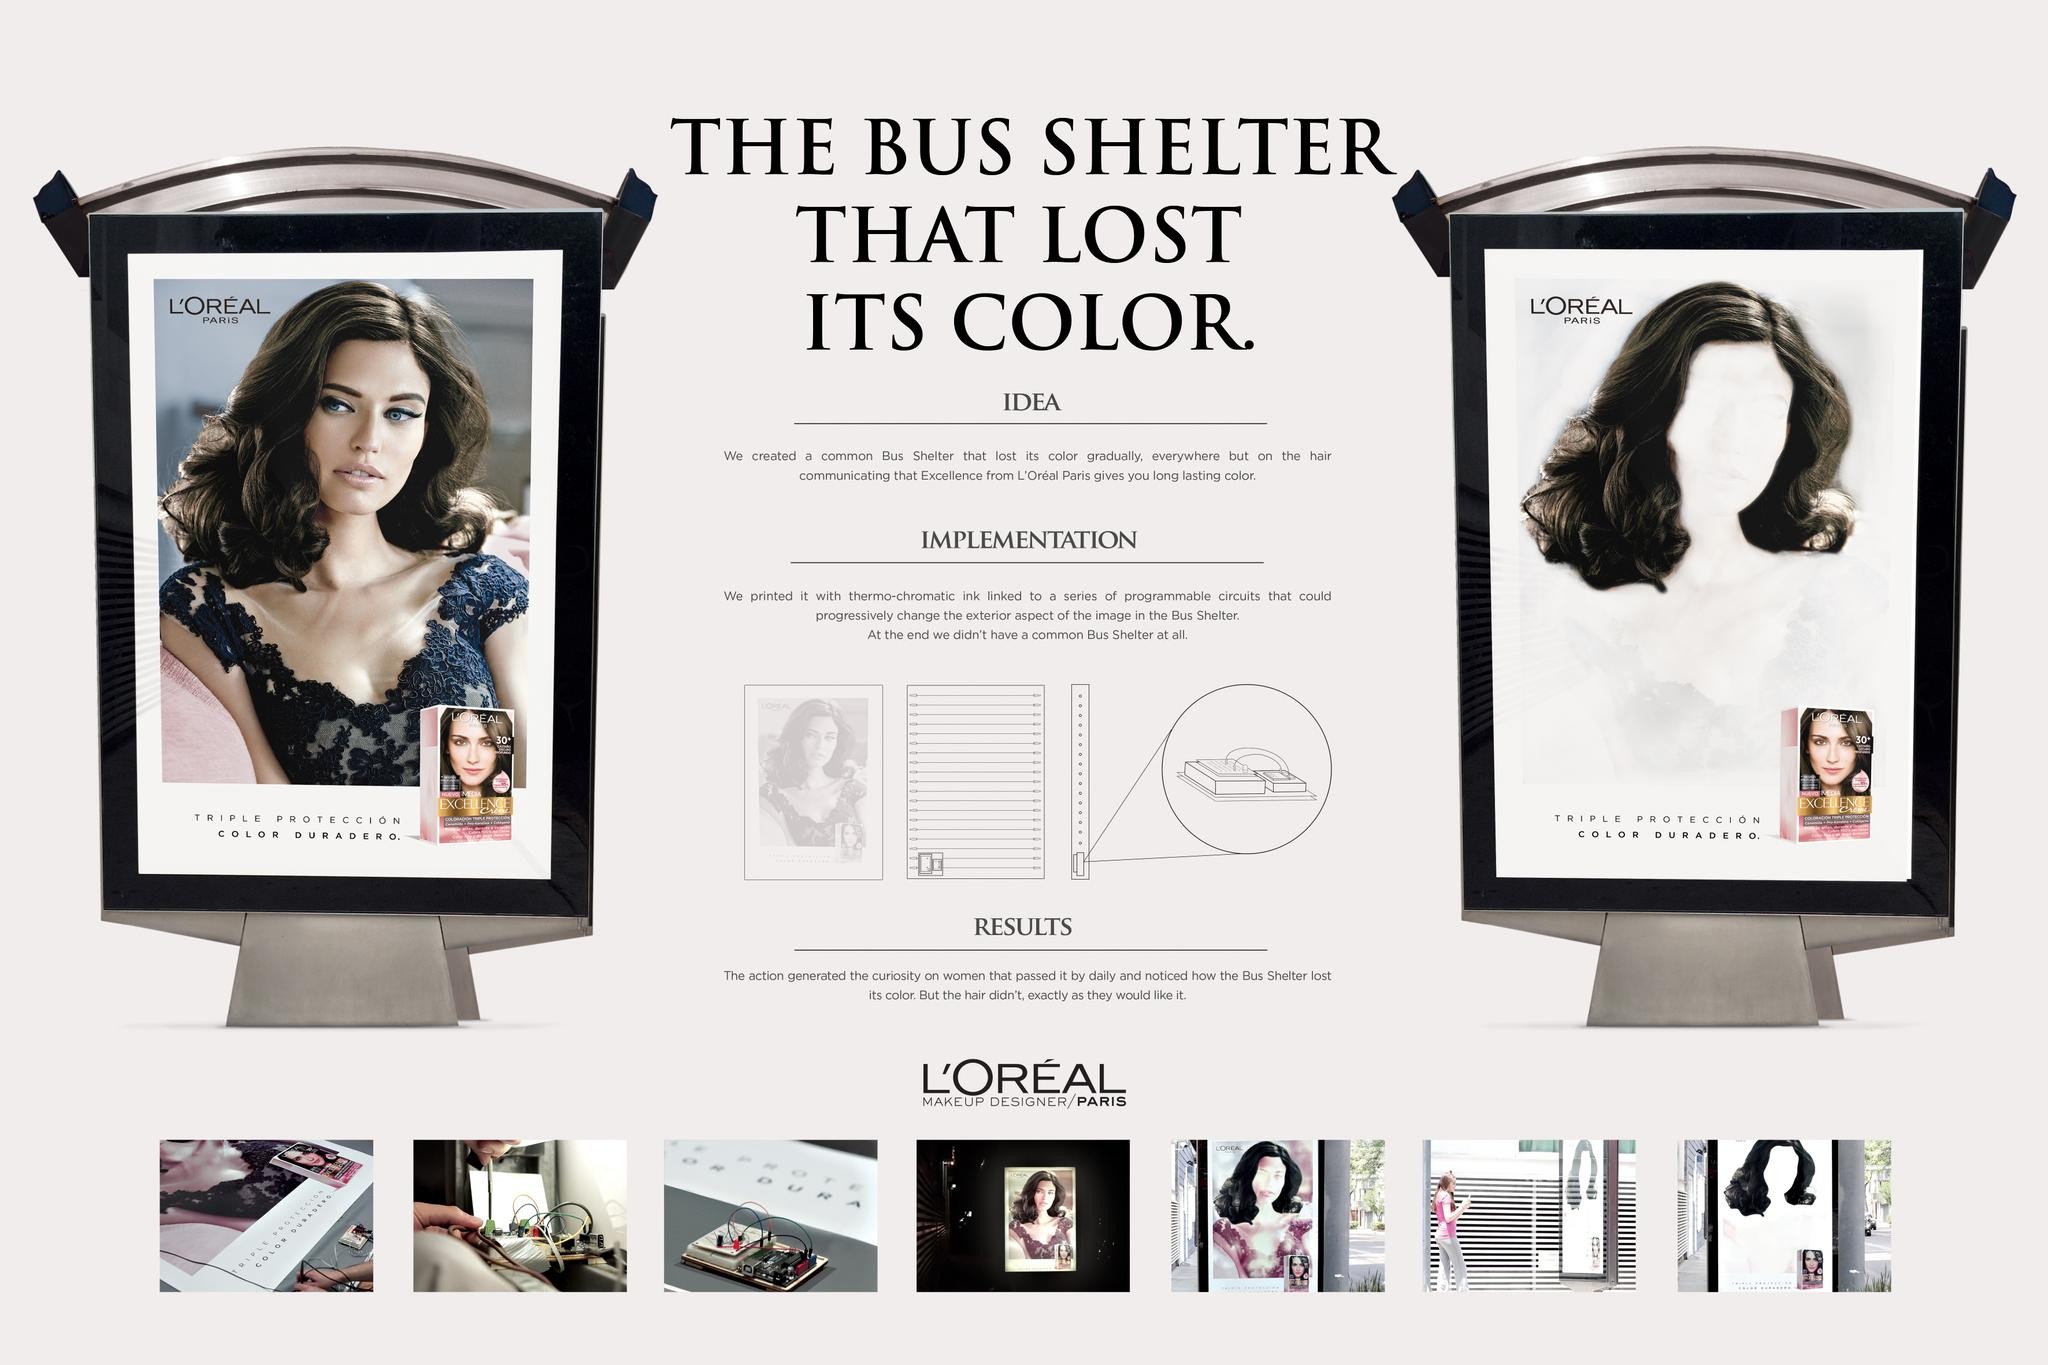 THE NO COLOR BUS SHELTER